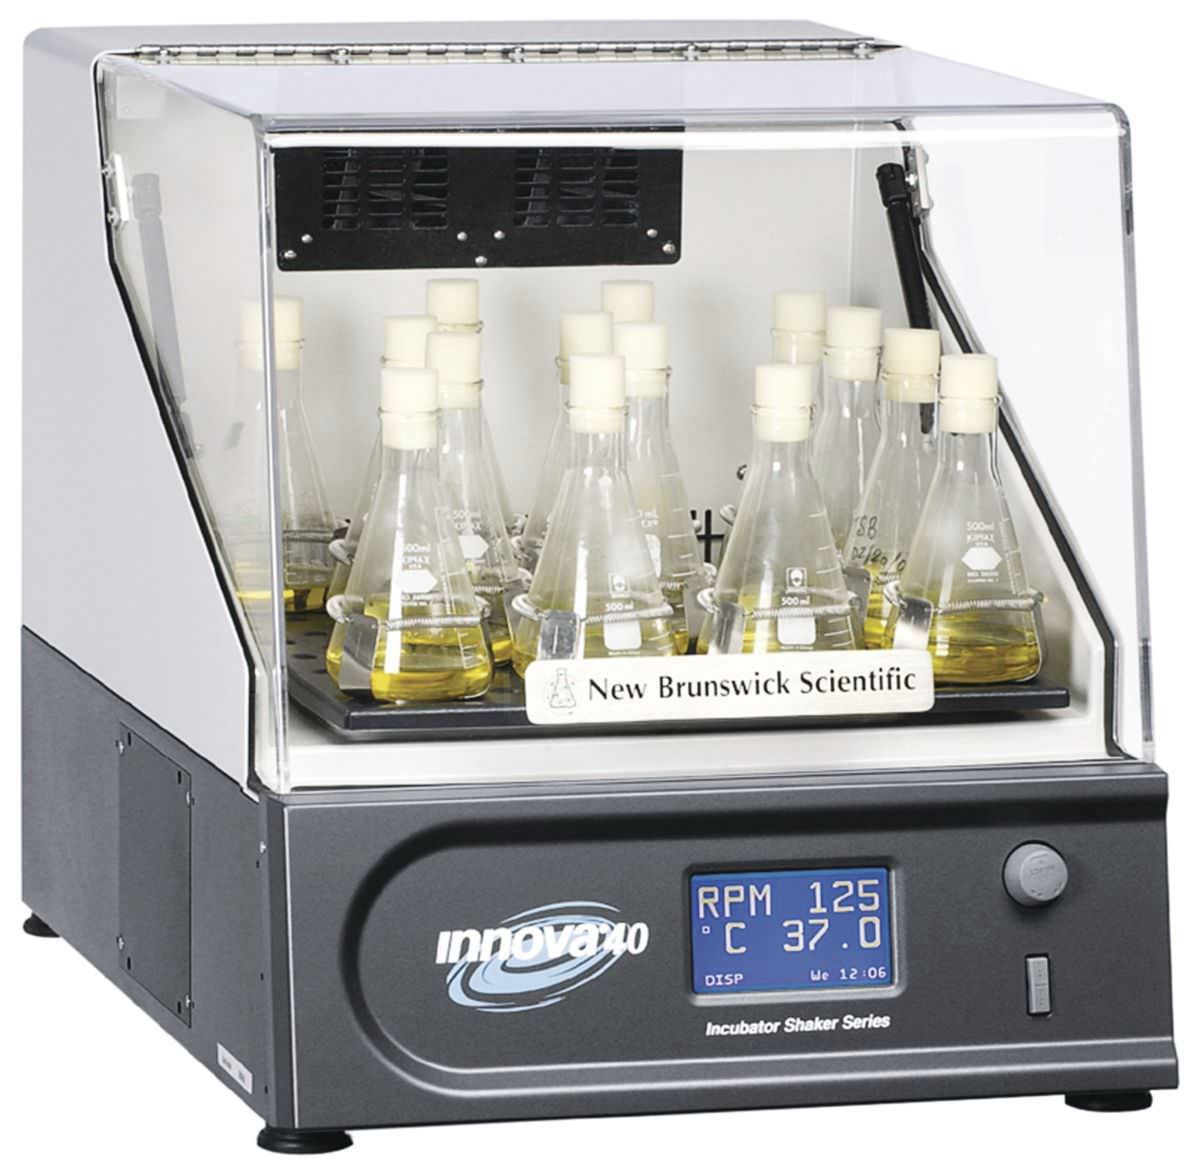 Refrigerated laboratory incubator shaker / bench-top / compact / flask Innova® 40R Eppendorf AG